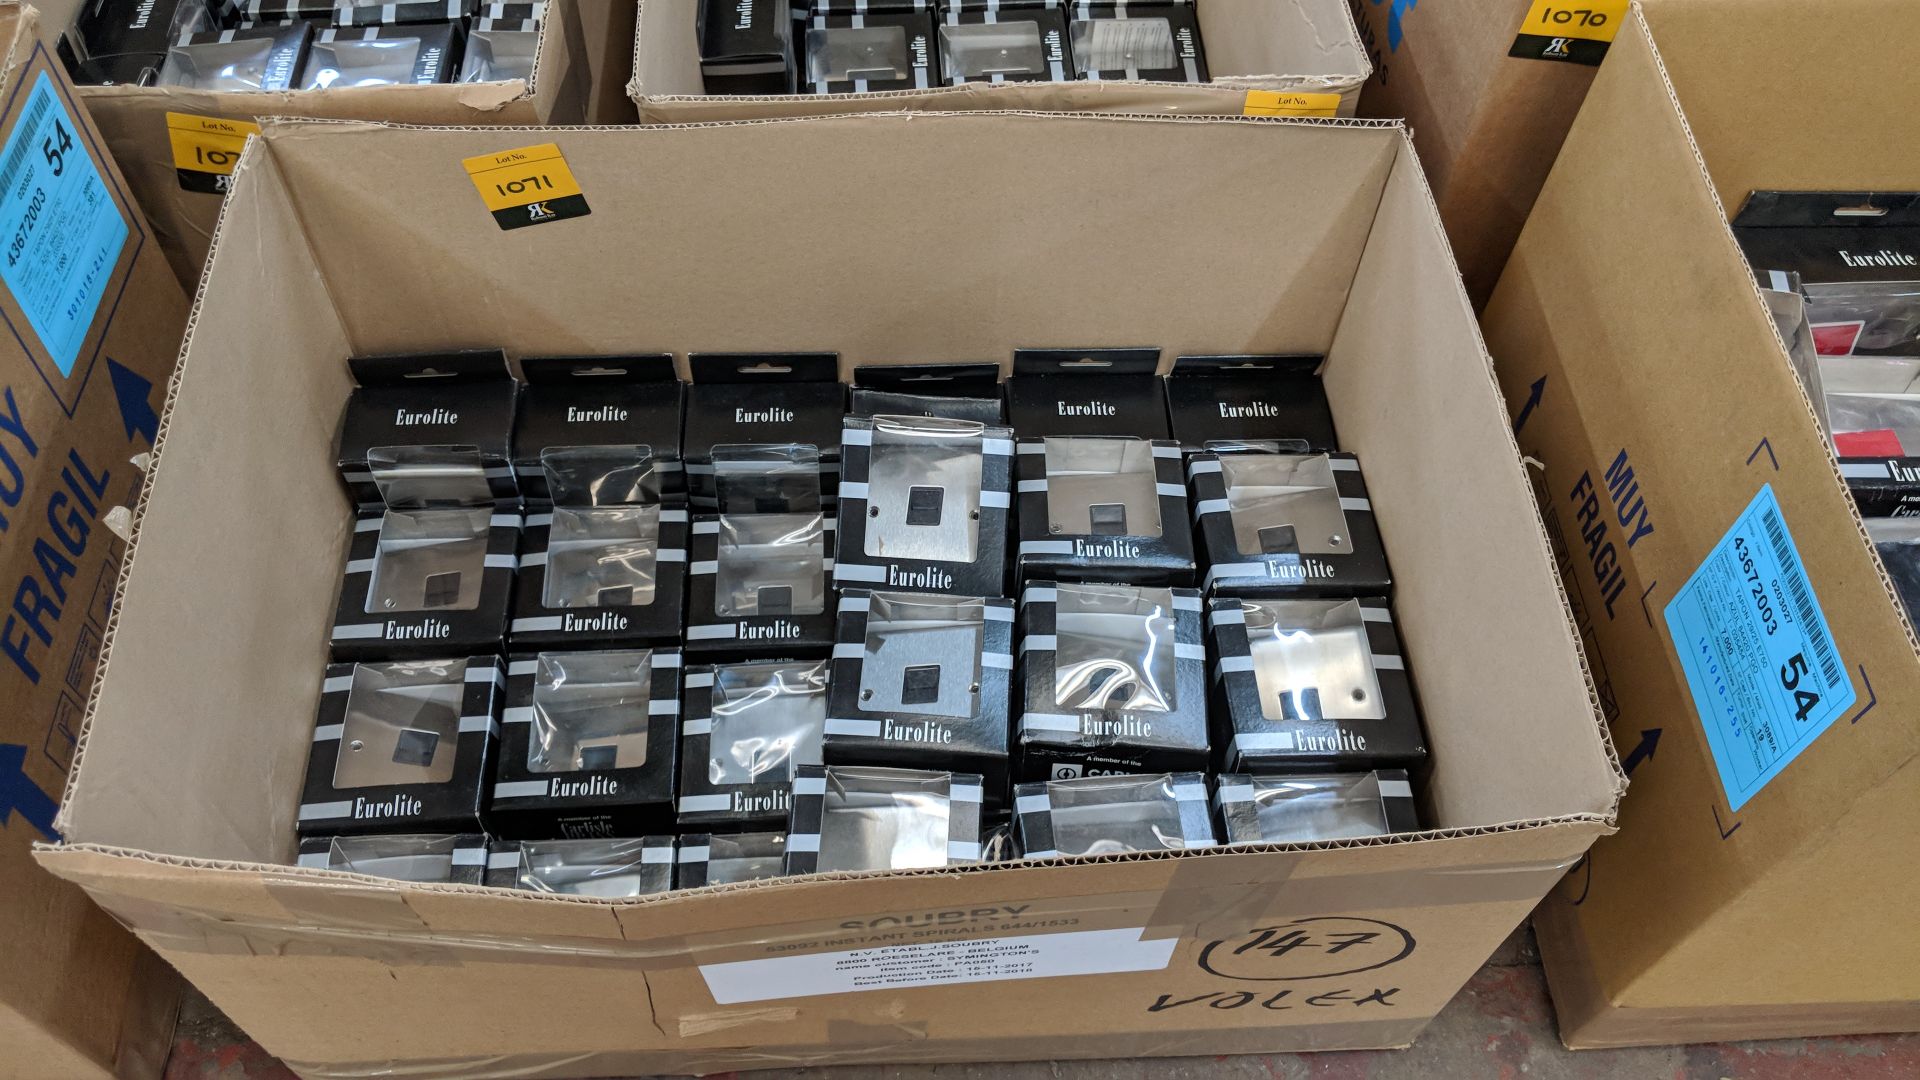 Approx. 32 Eurolite silver telephone sockets The vast majority of products in this auction appear